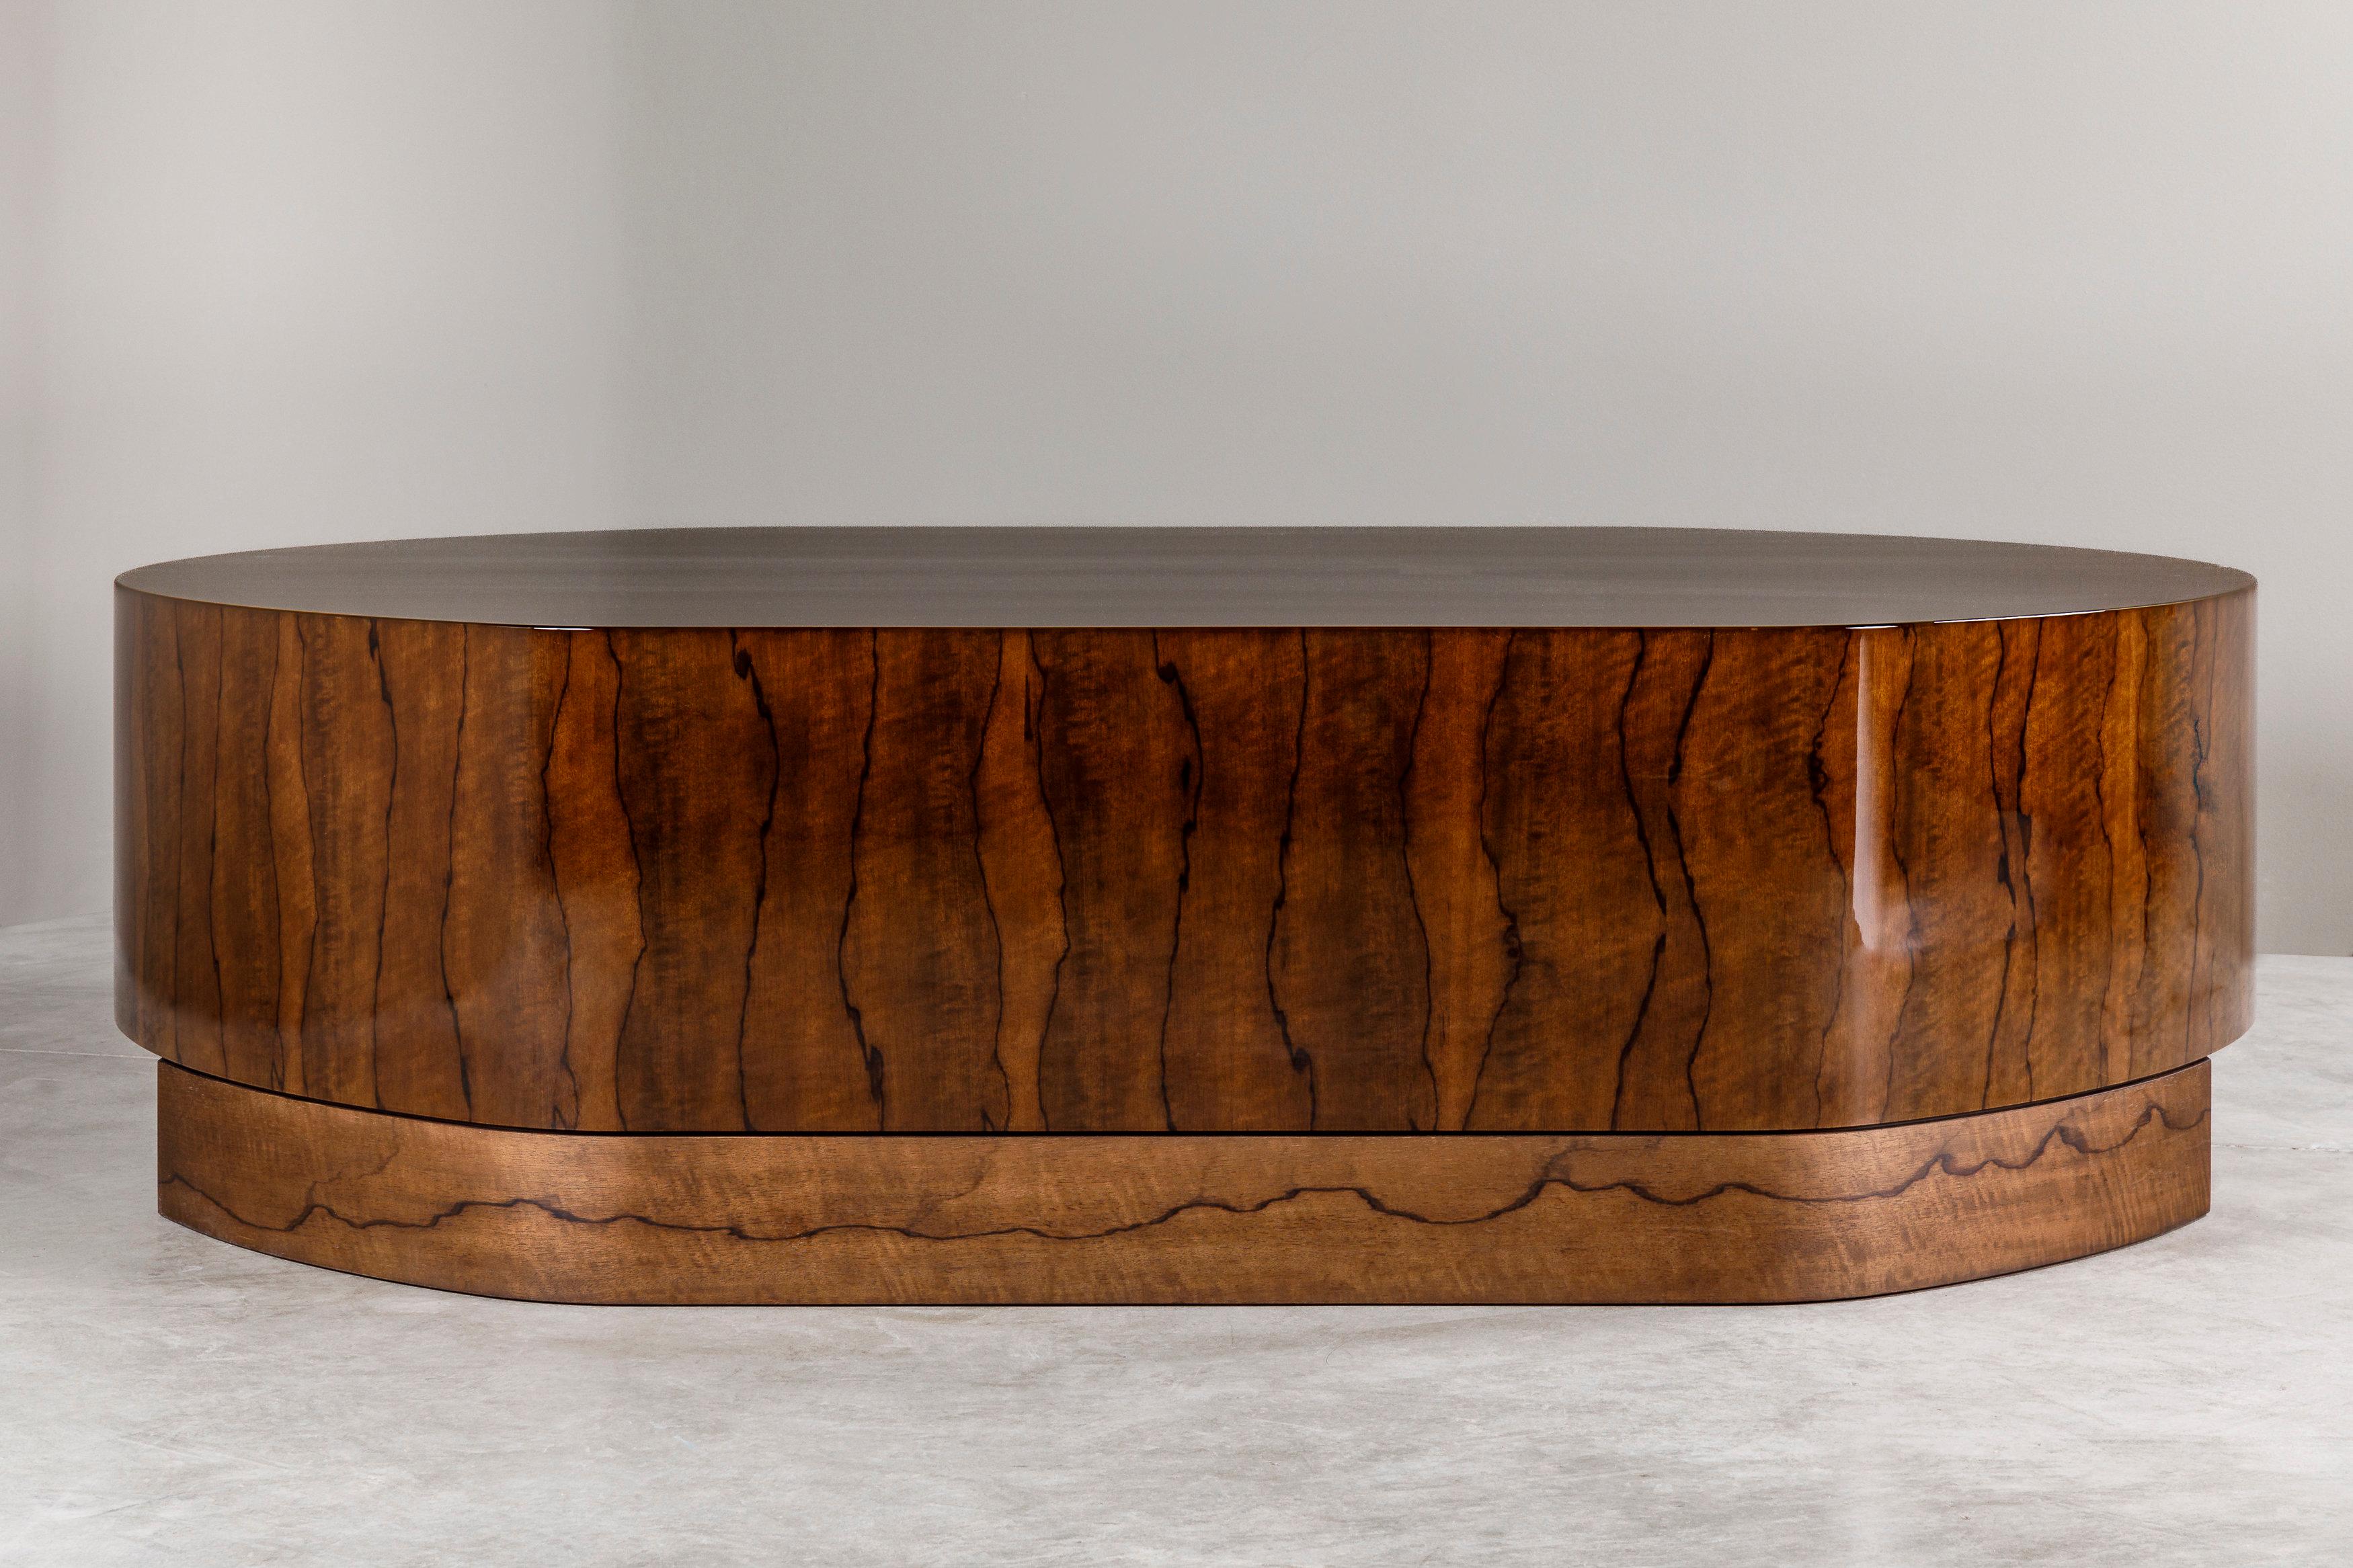 The ECU coffee table, created in 2023 by Atelier Linné, is made from an African wood called Limba Superba, recognizable by its dark veins on a blond background. The table has an oblong shape and rests on a recessed solid base. The alternating use of